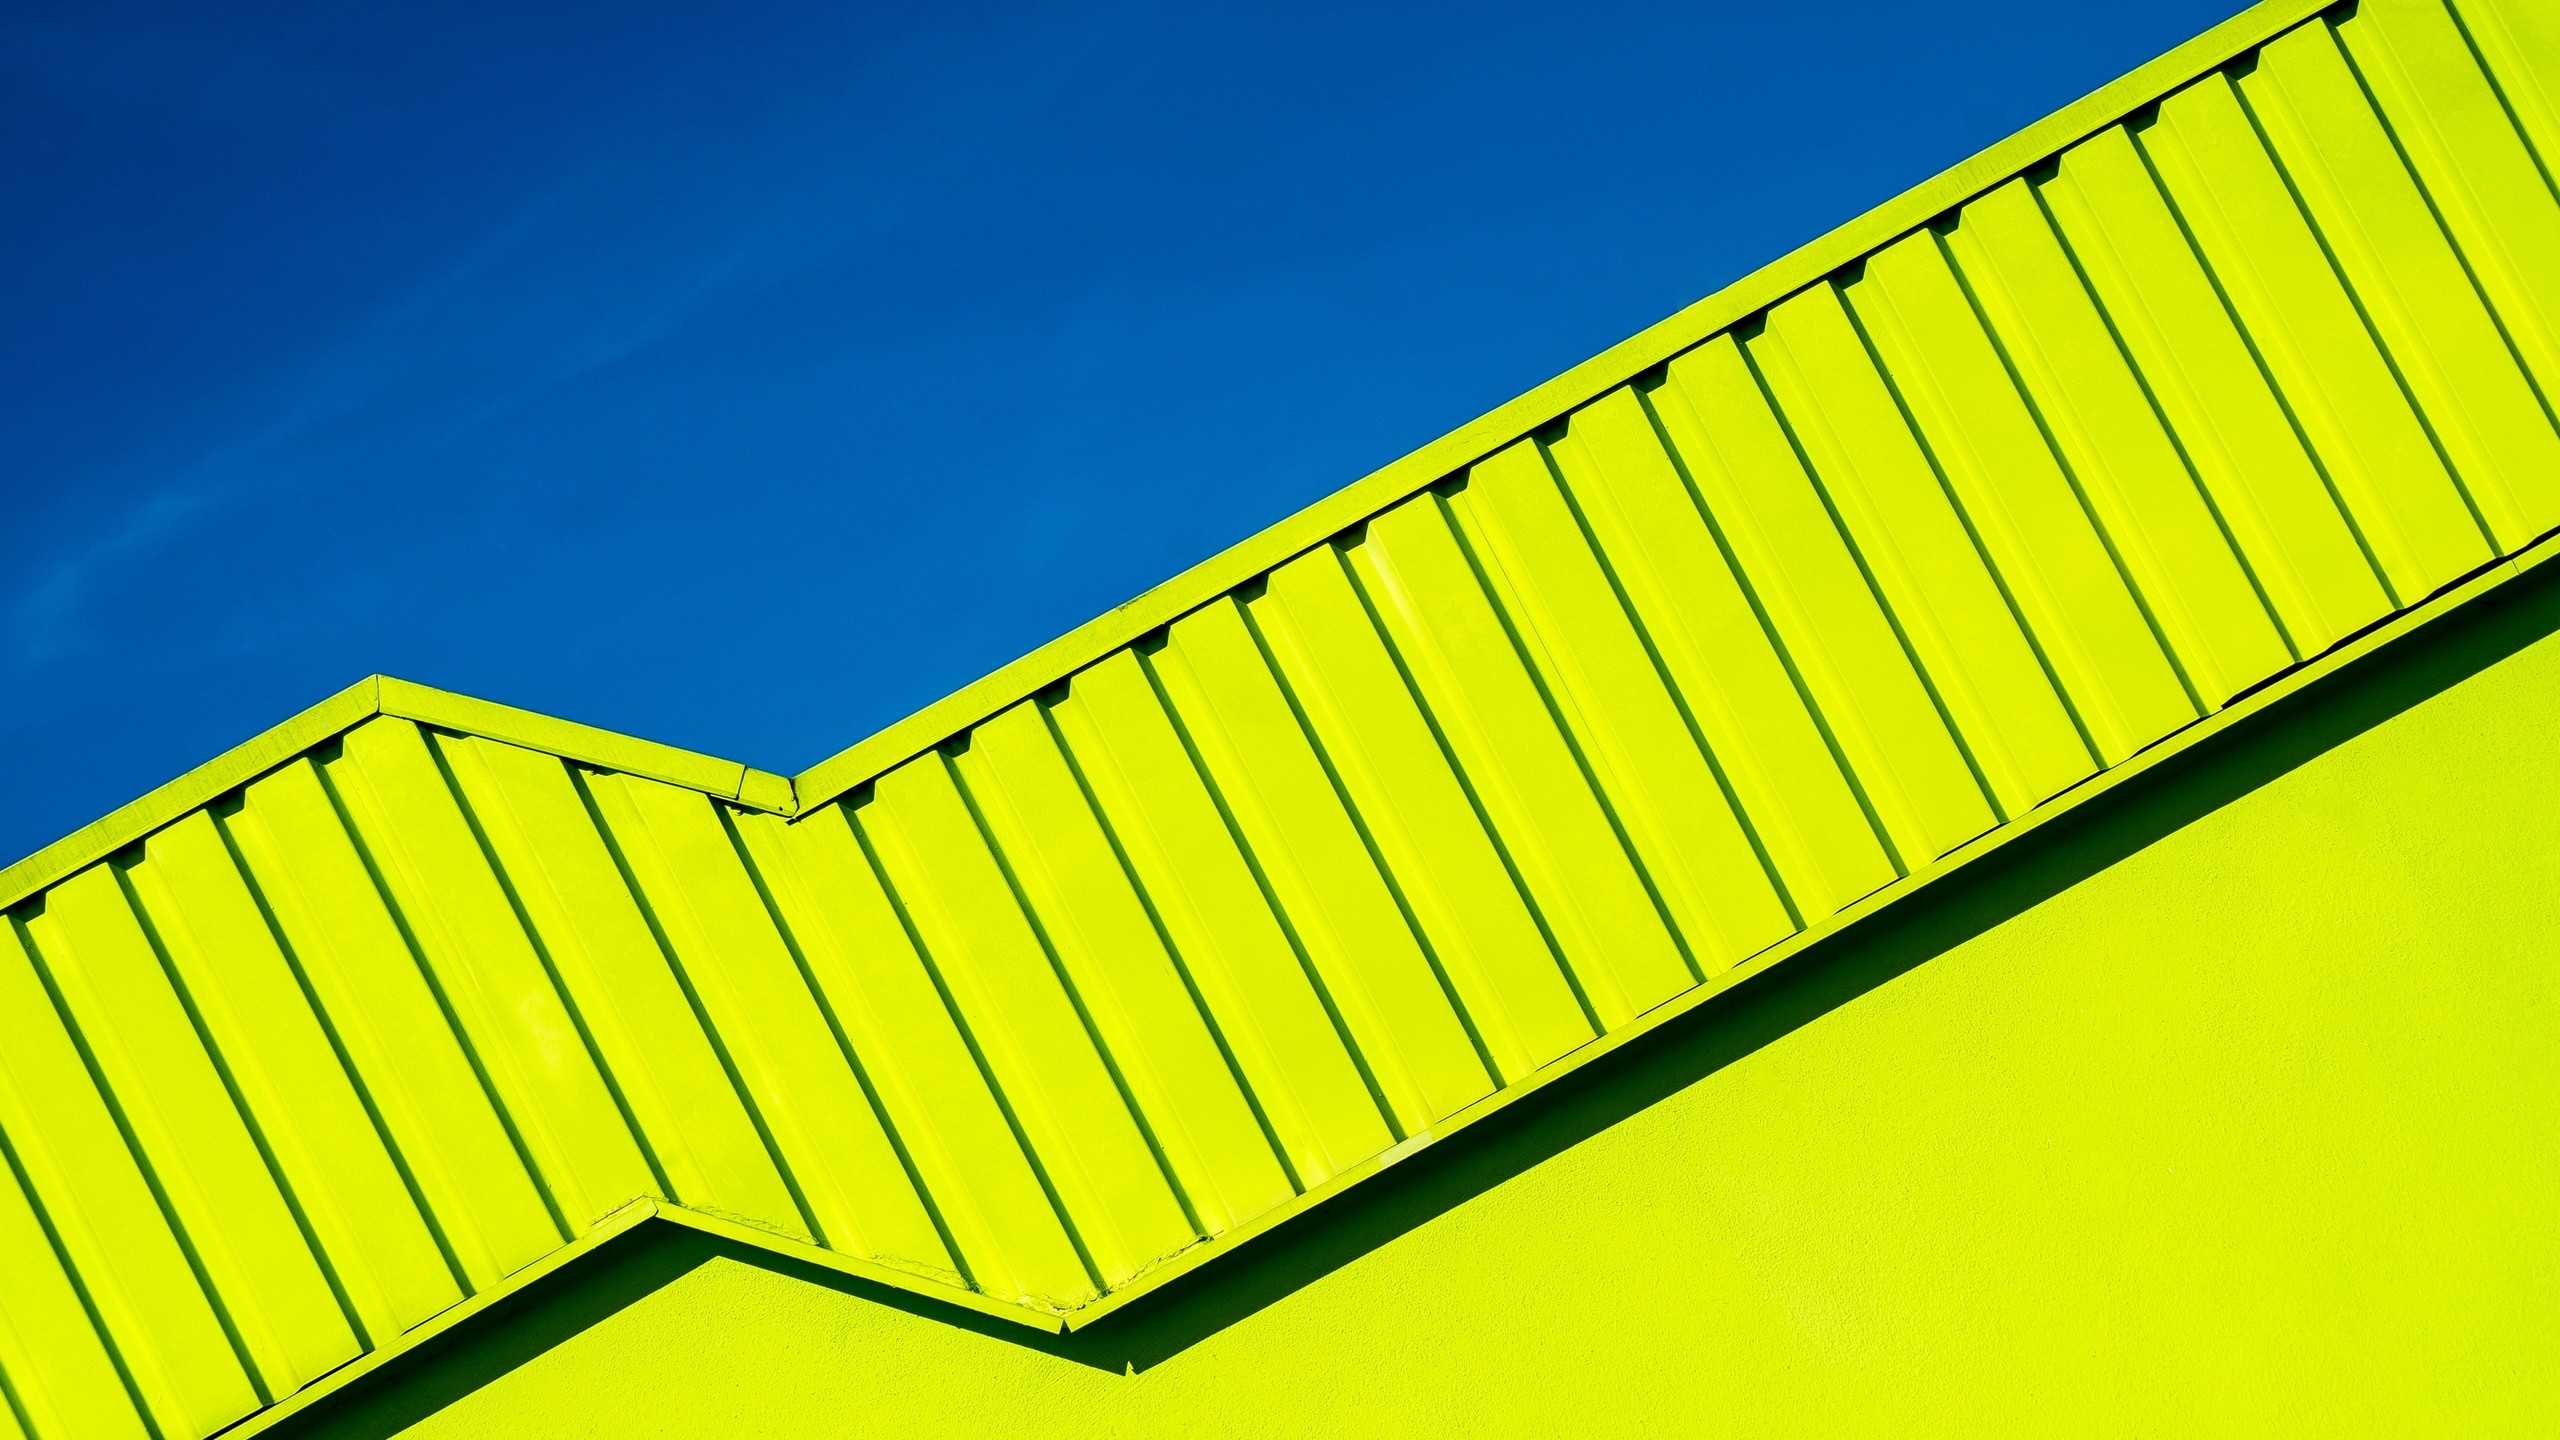 General 2560x1440 abstract architecture modern rooftops sky clear sky blue yellow shadow minimalism